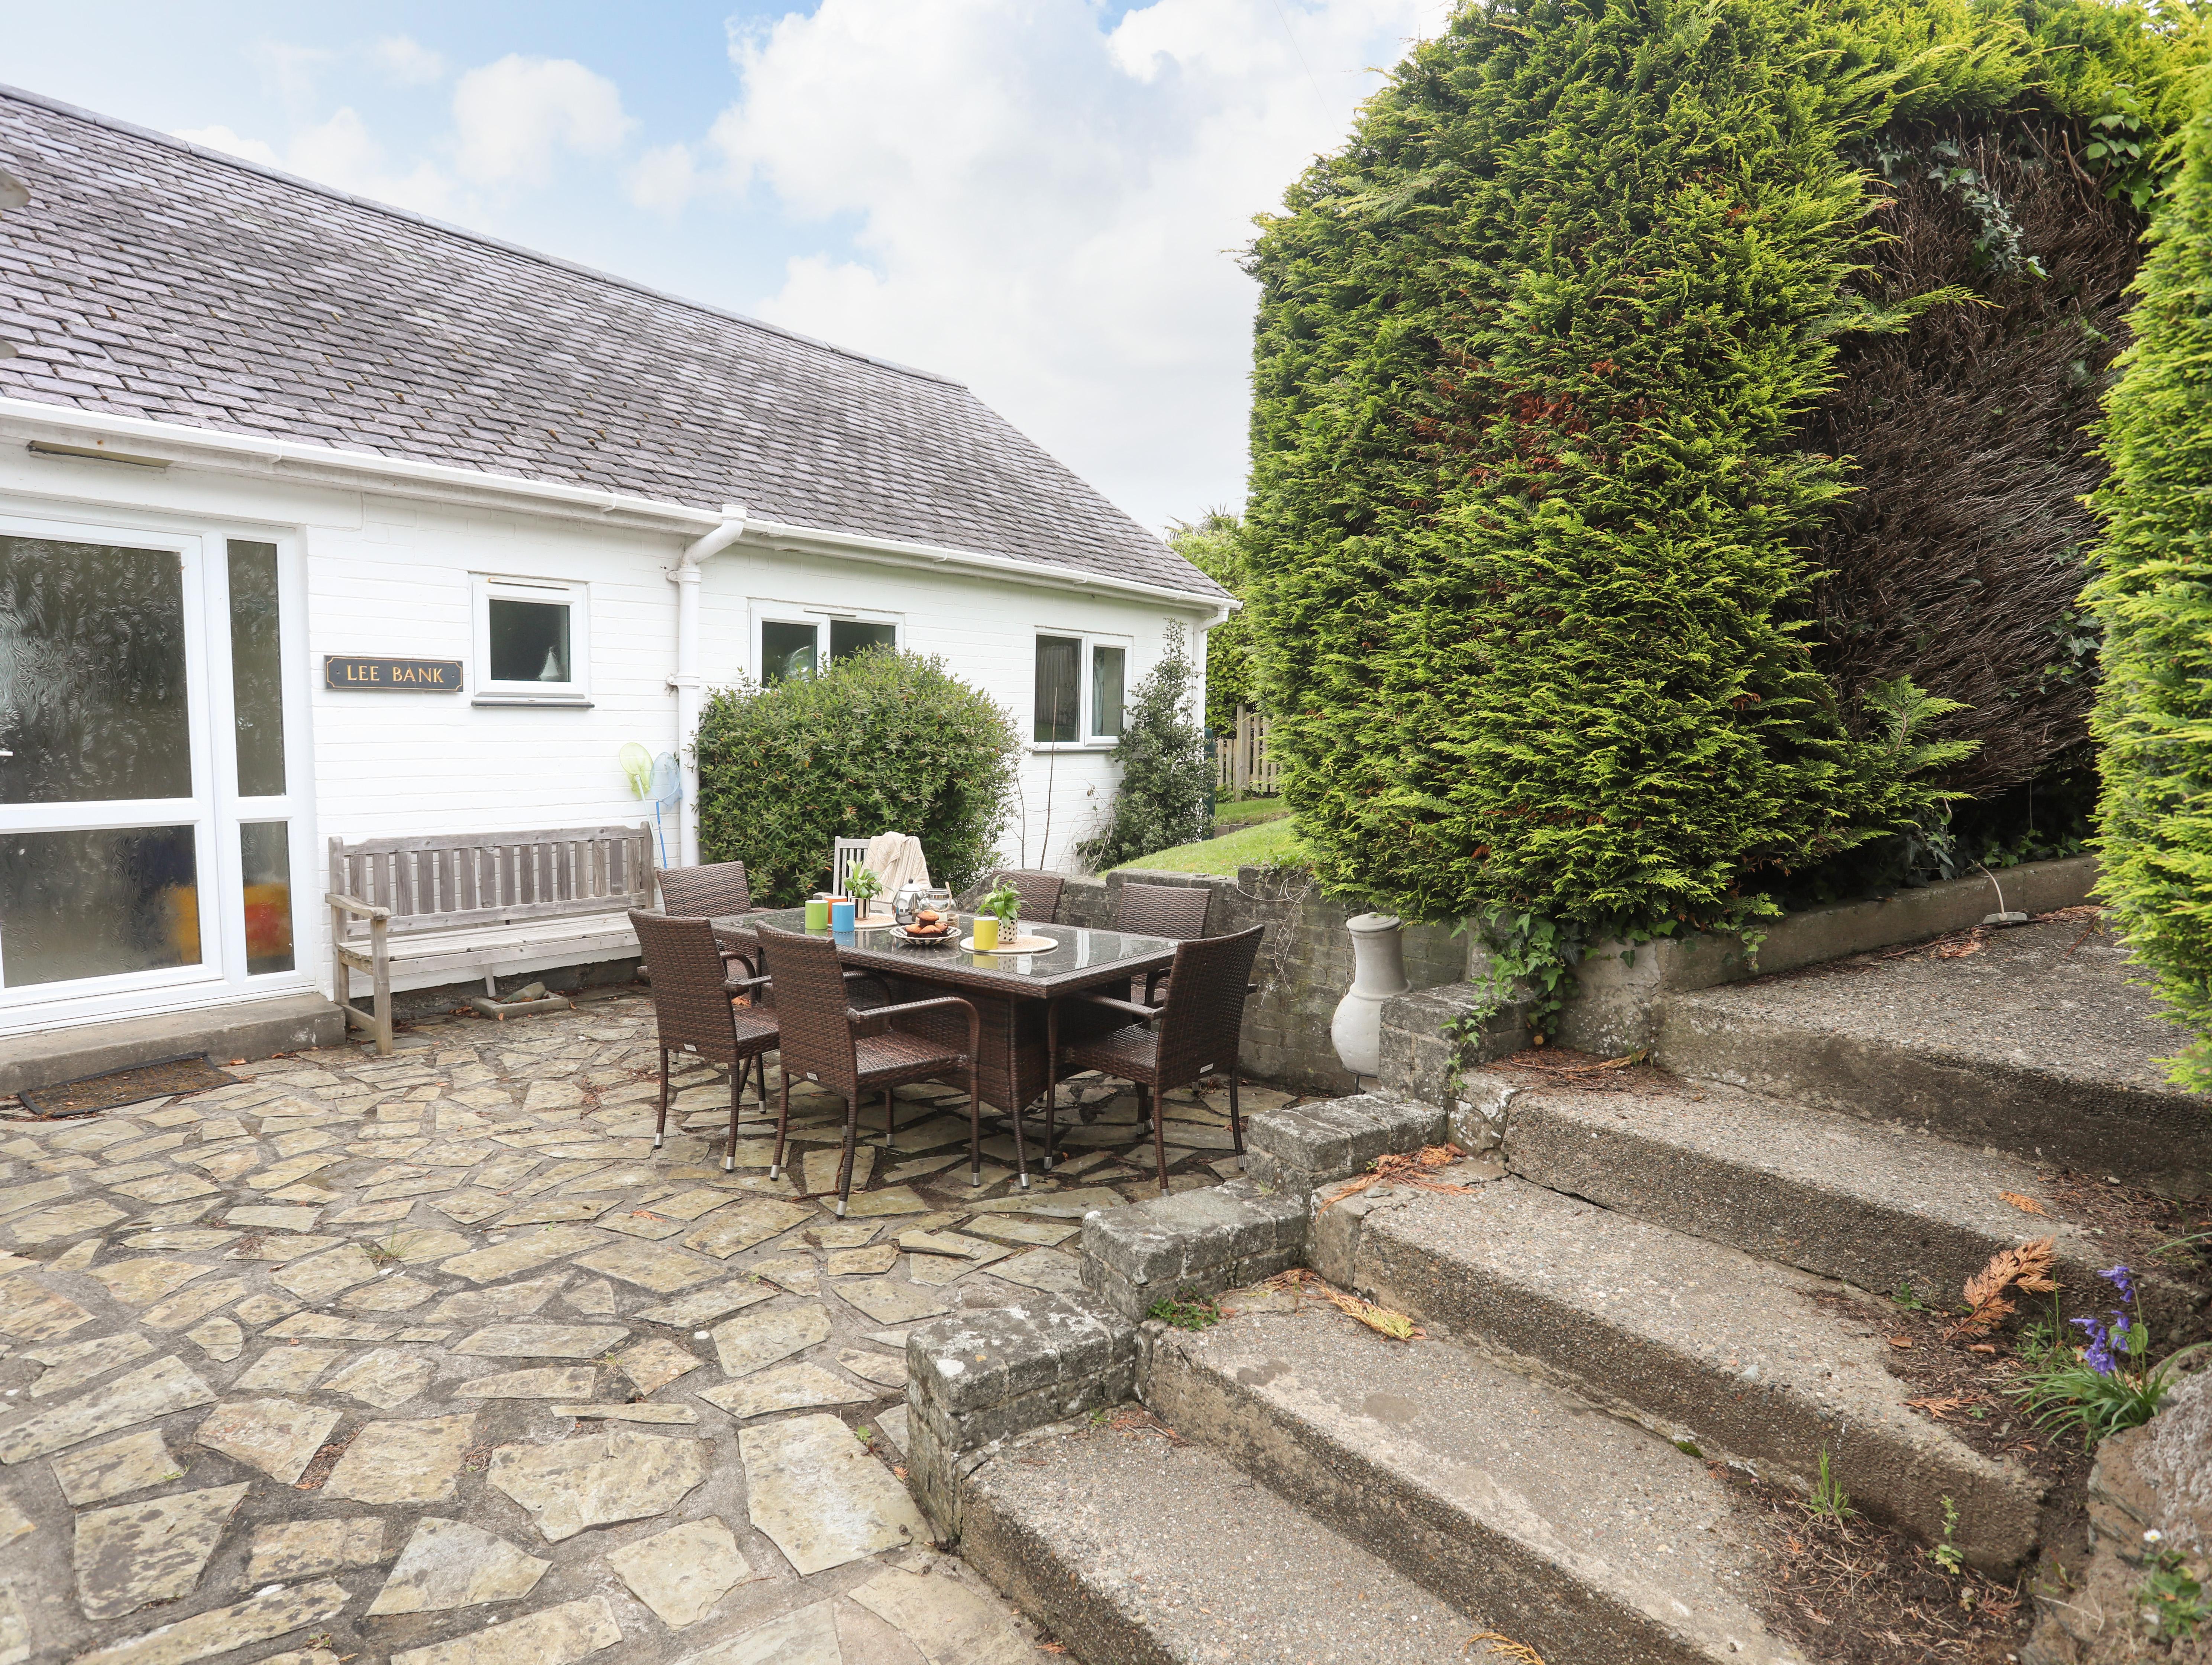 Holiday Cottage Reviews for Lee Bank - Self Catering Property in Abersoch, Gwynedd